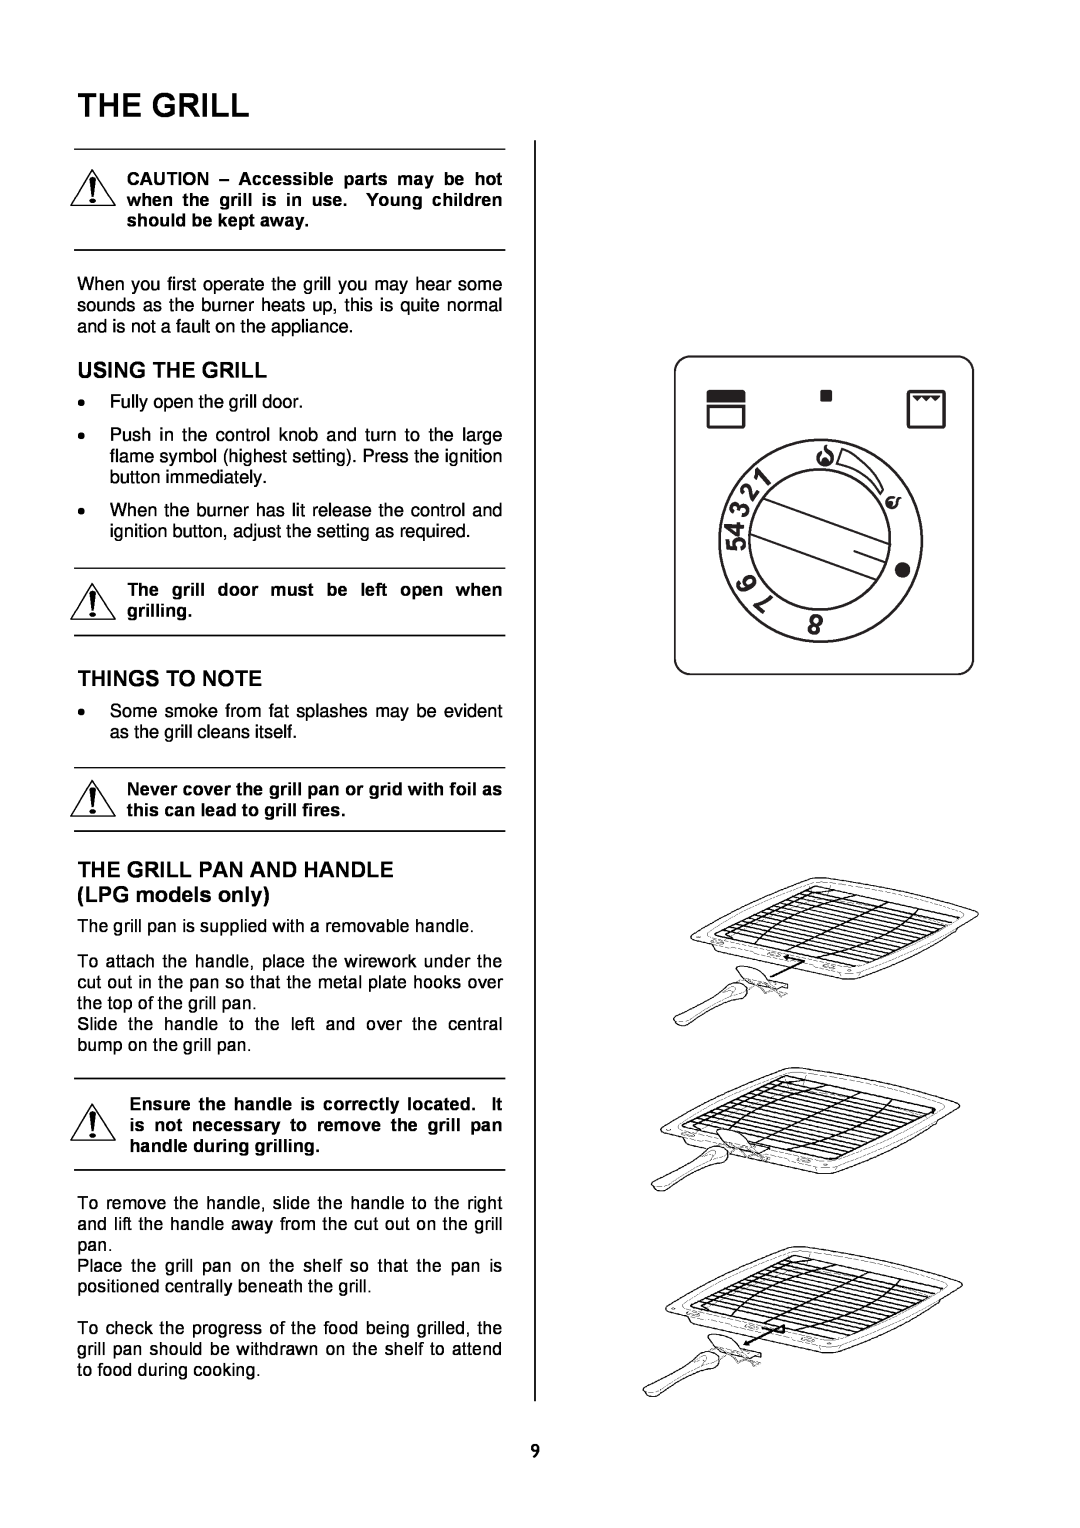 Electrolux EKG5046, EKG5047 manual Using The Grill, THE GRILL PAN AND HANDLE LPG models only, Things To Note 